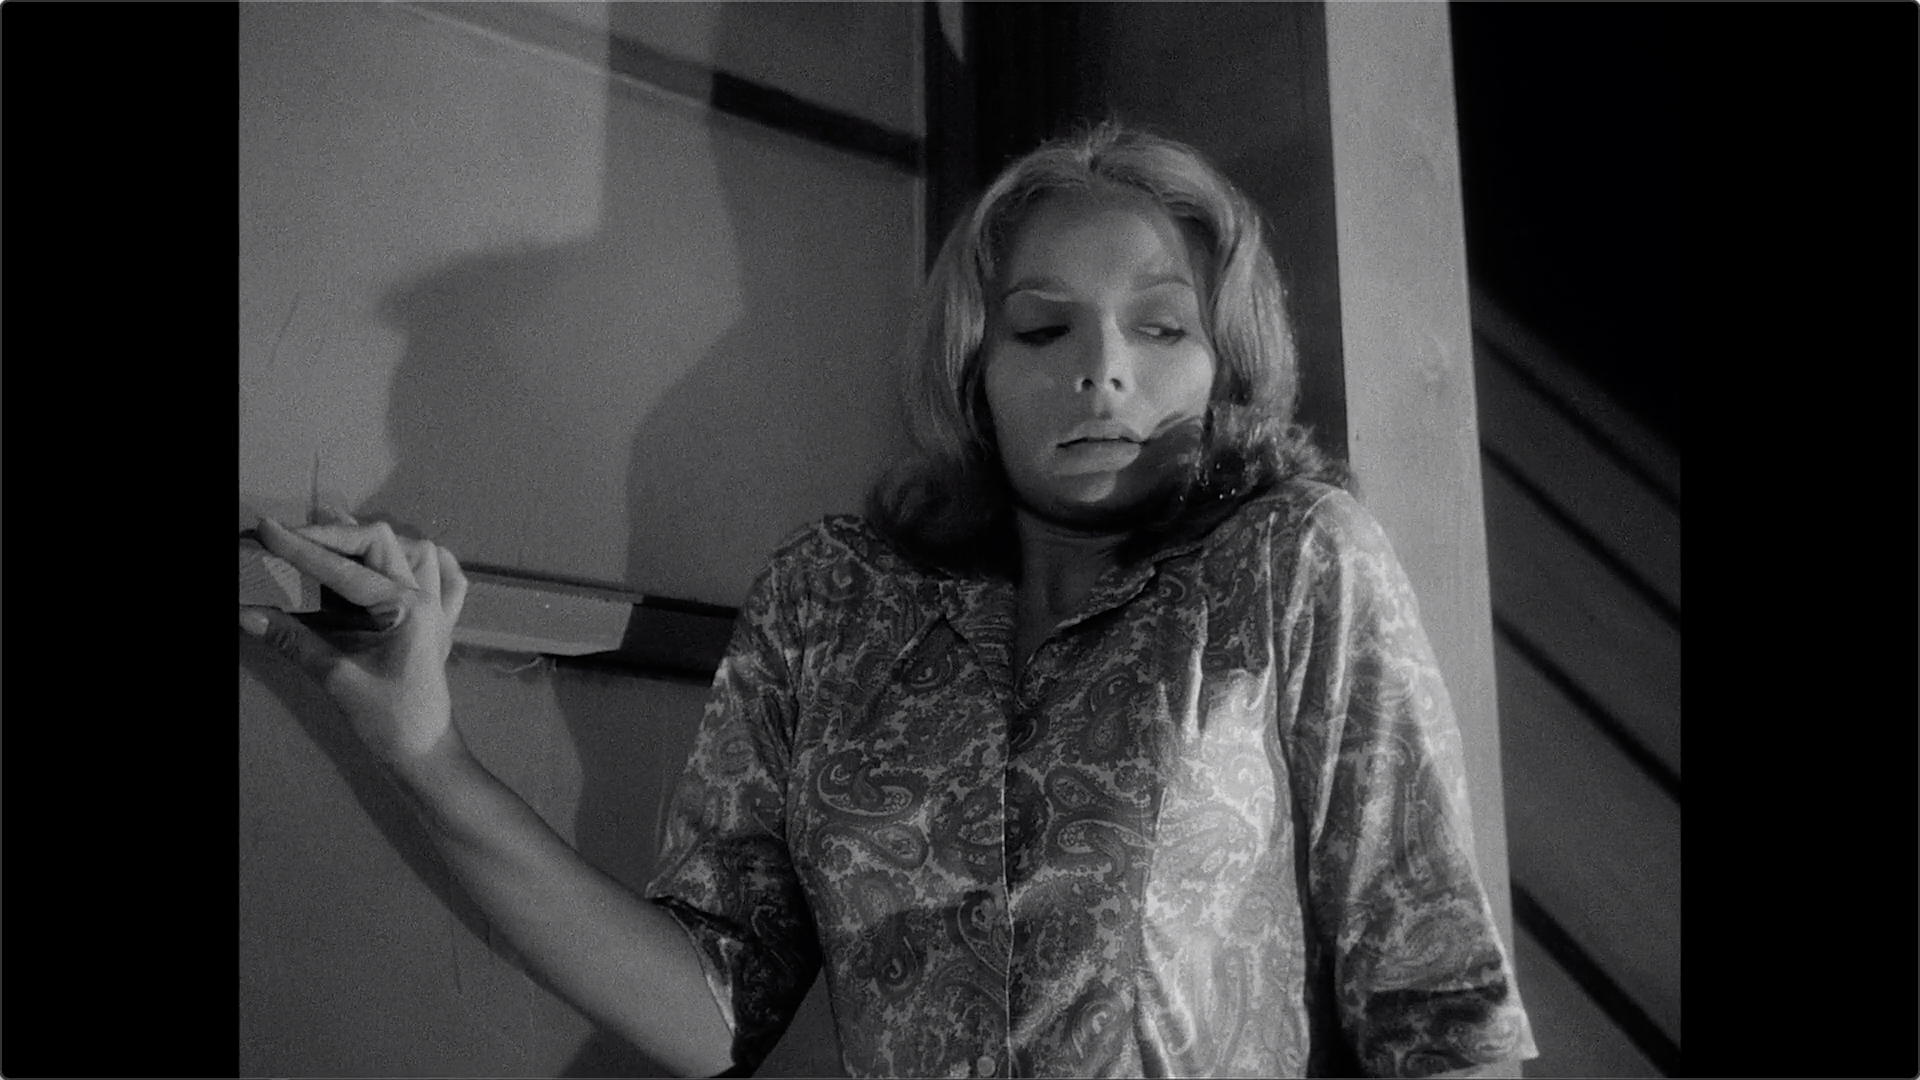 the-outer-limits-s02e05-demon-with-a-glass-hand-oct-17-1964-28-jpg.219541